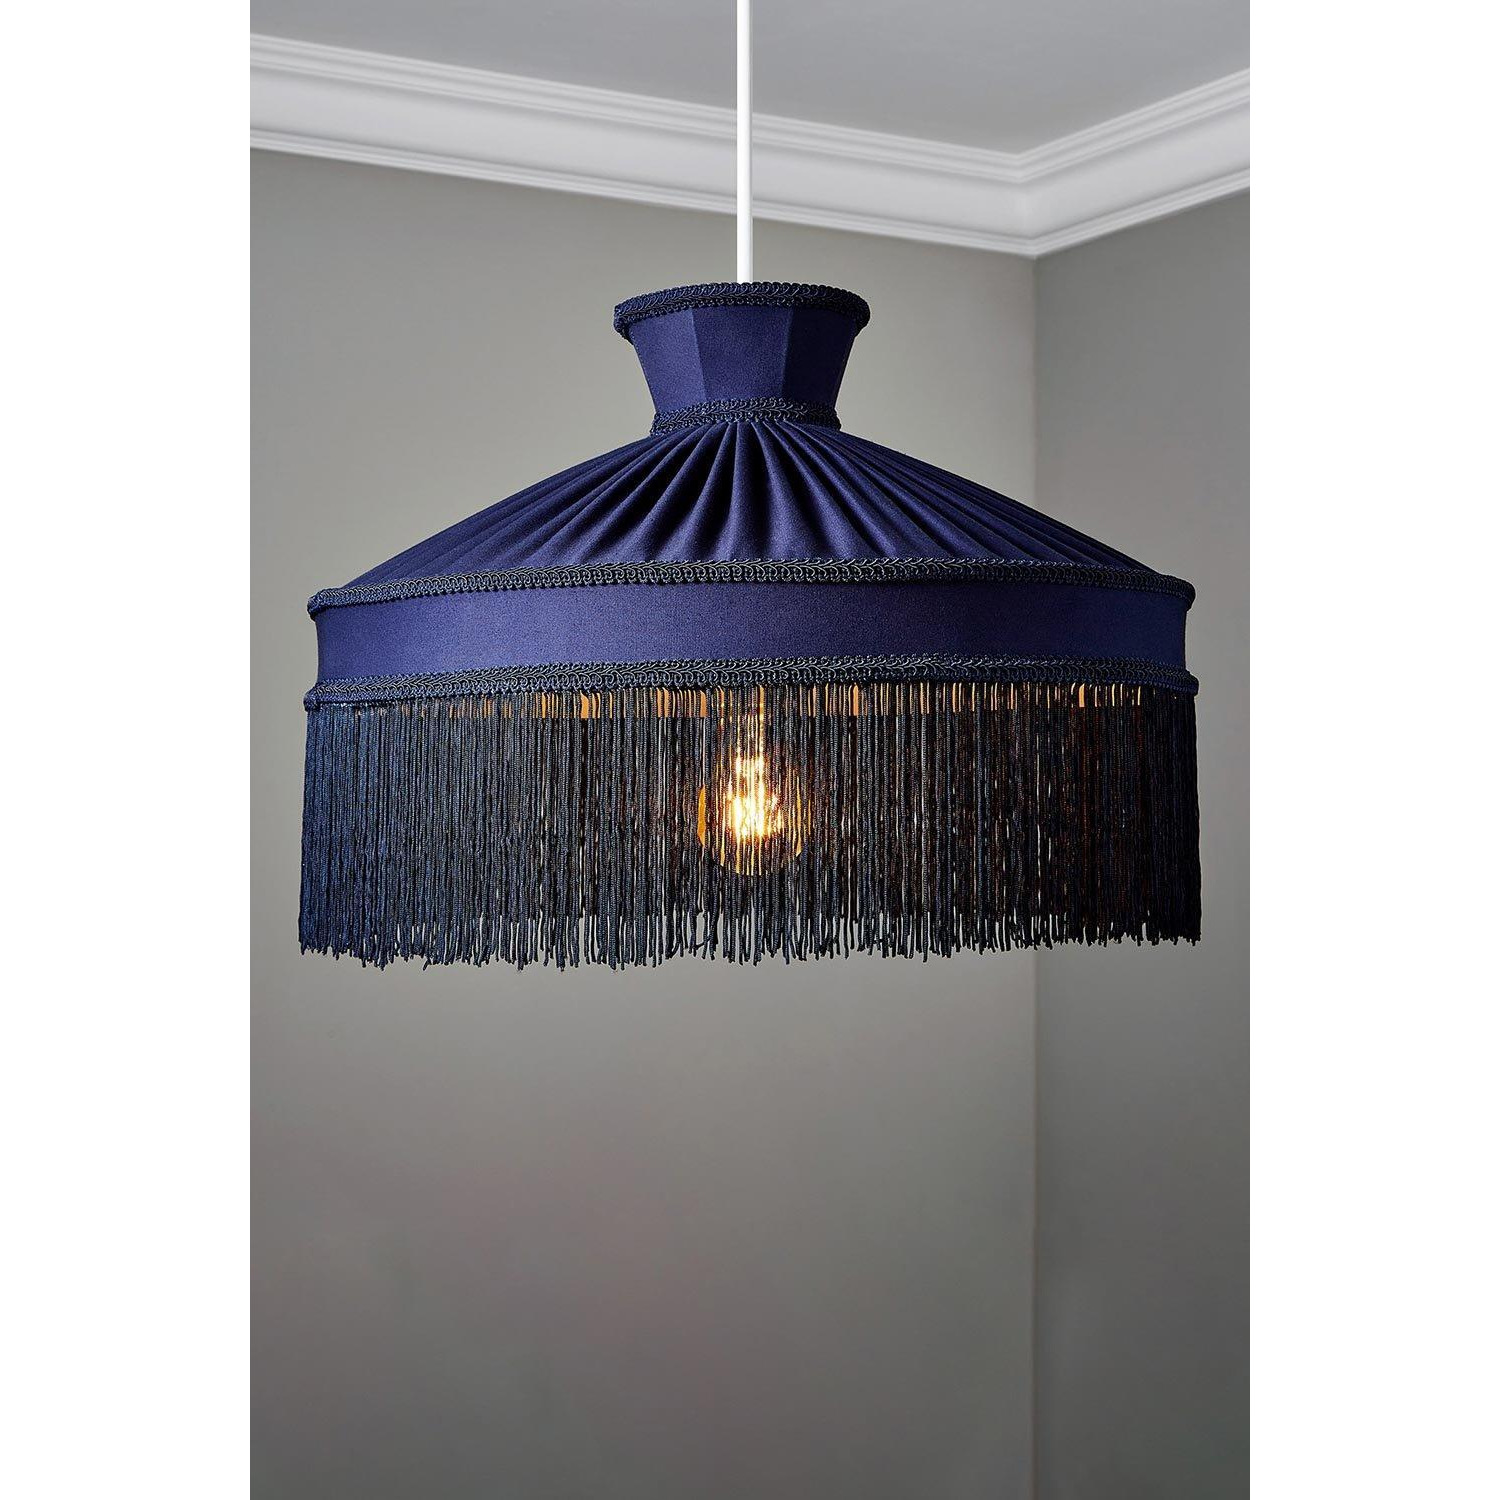 Darcy Easy Fit Light Shade - image 1